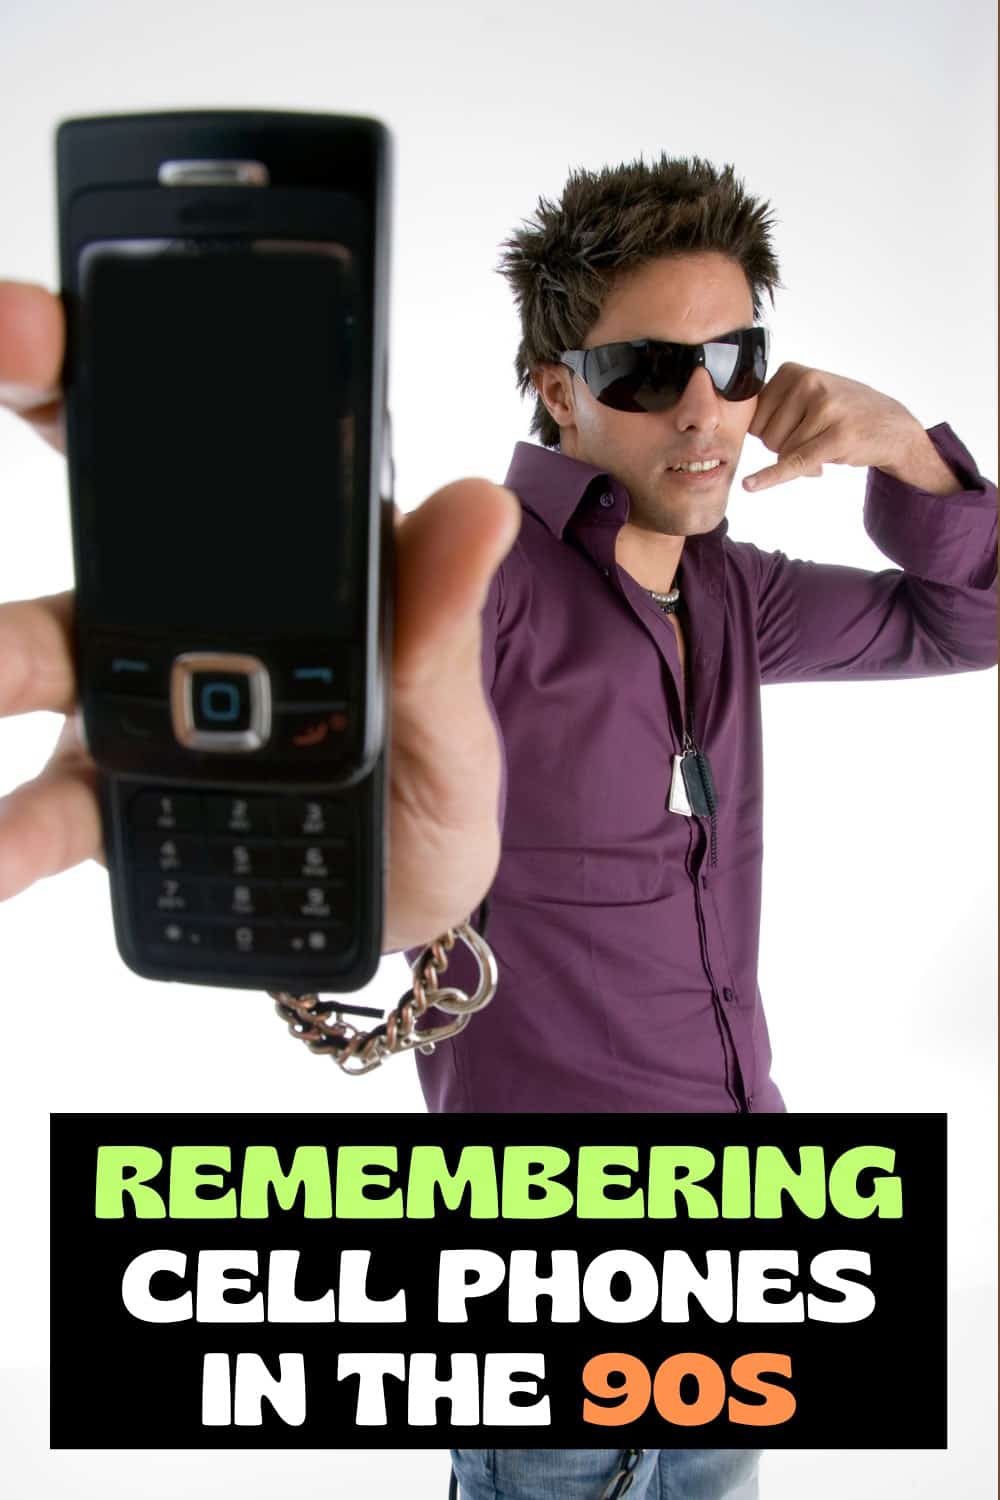 Cell phones from the 90s were bulky and heavy